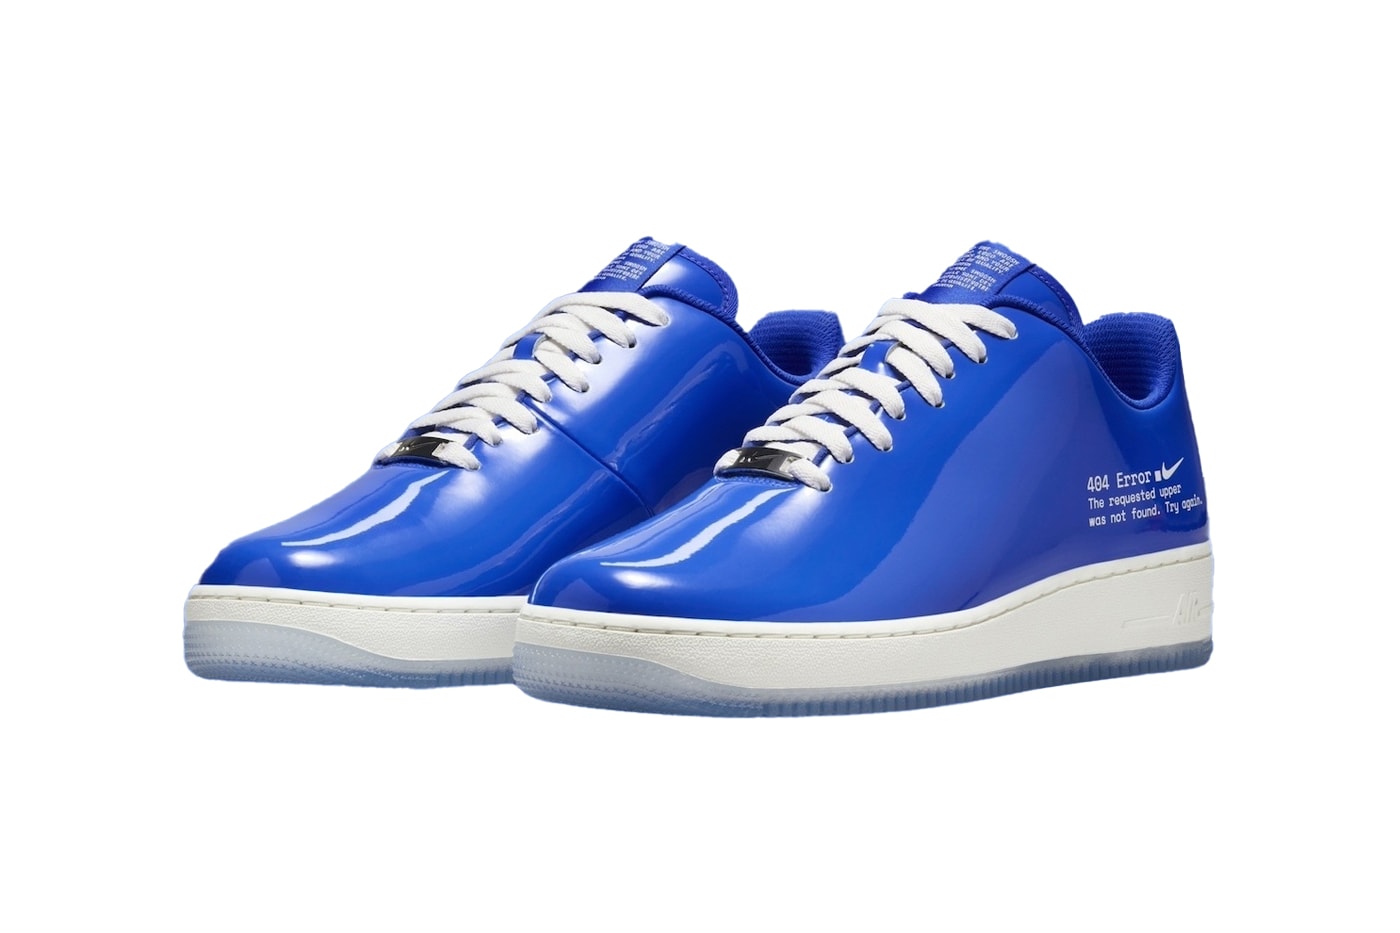 Official Look at the .SWOOSH x Nike Air Force 1 Low "404 Error" HJ1060-400 racer blue white